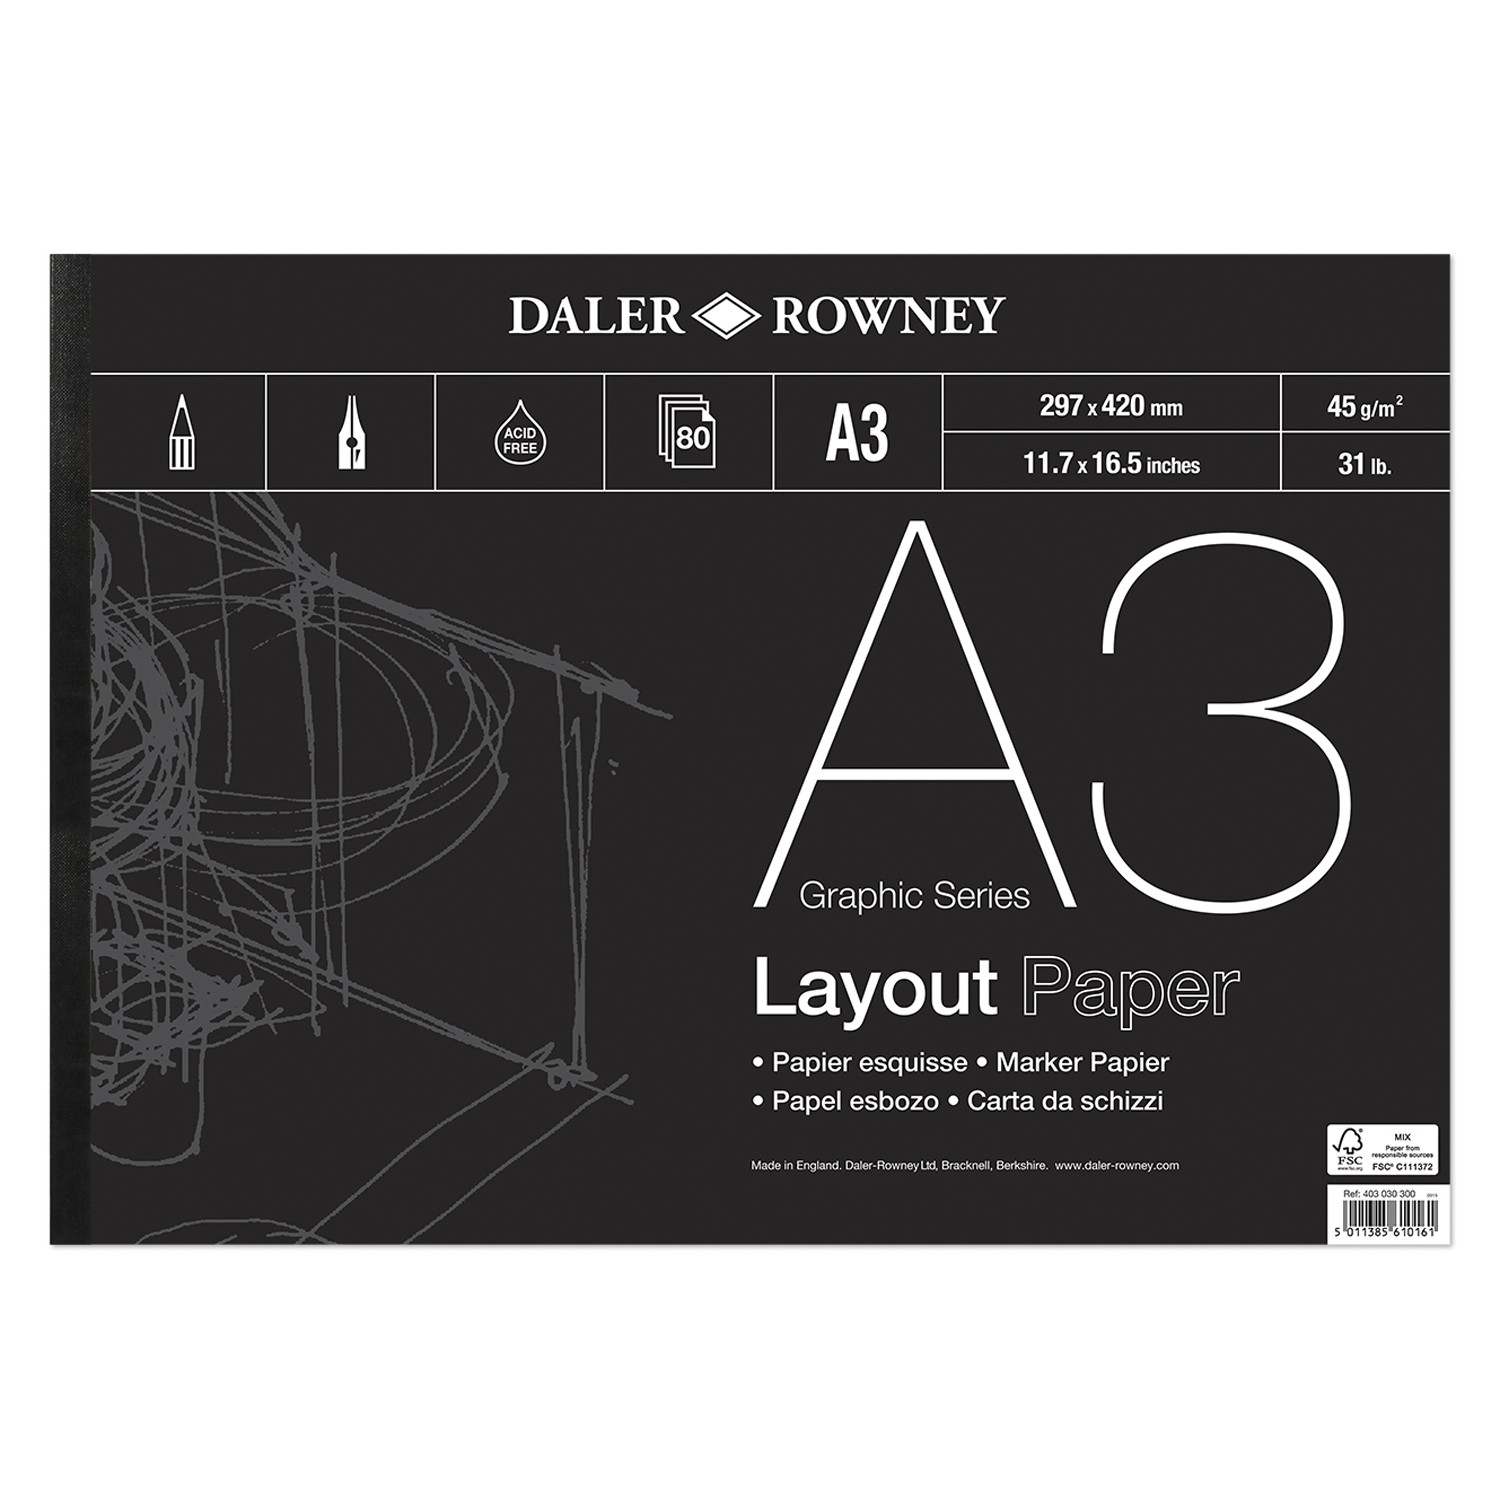 Daler-Rowney Graphic Series Layout Pad - A3 Image